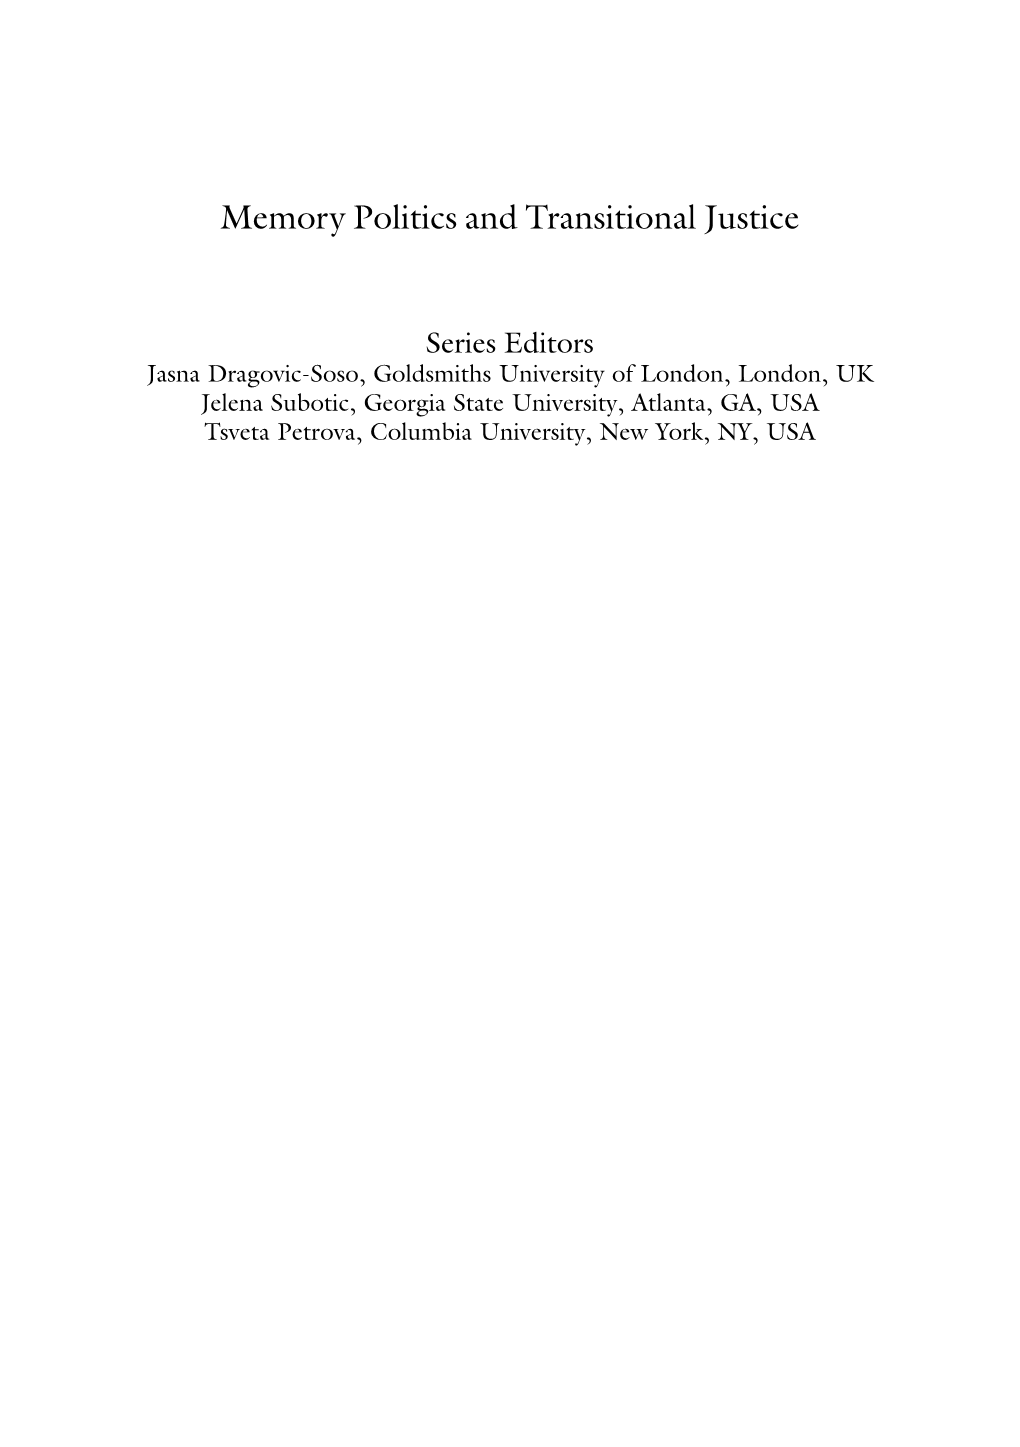 Memory Politics and Transitional Justice